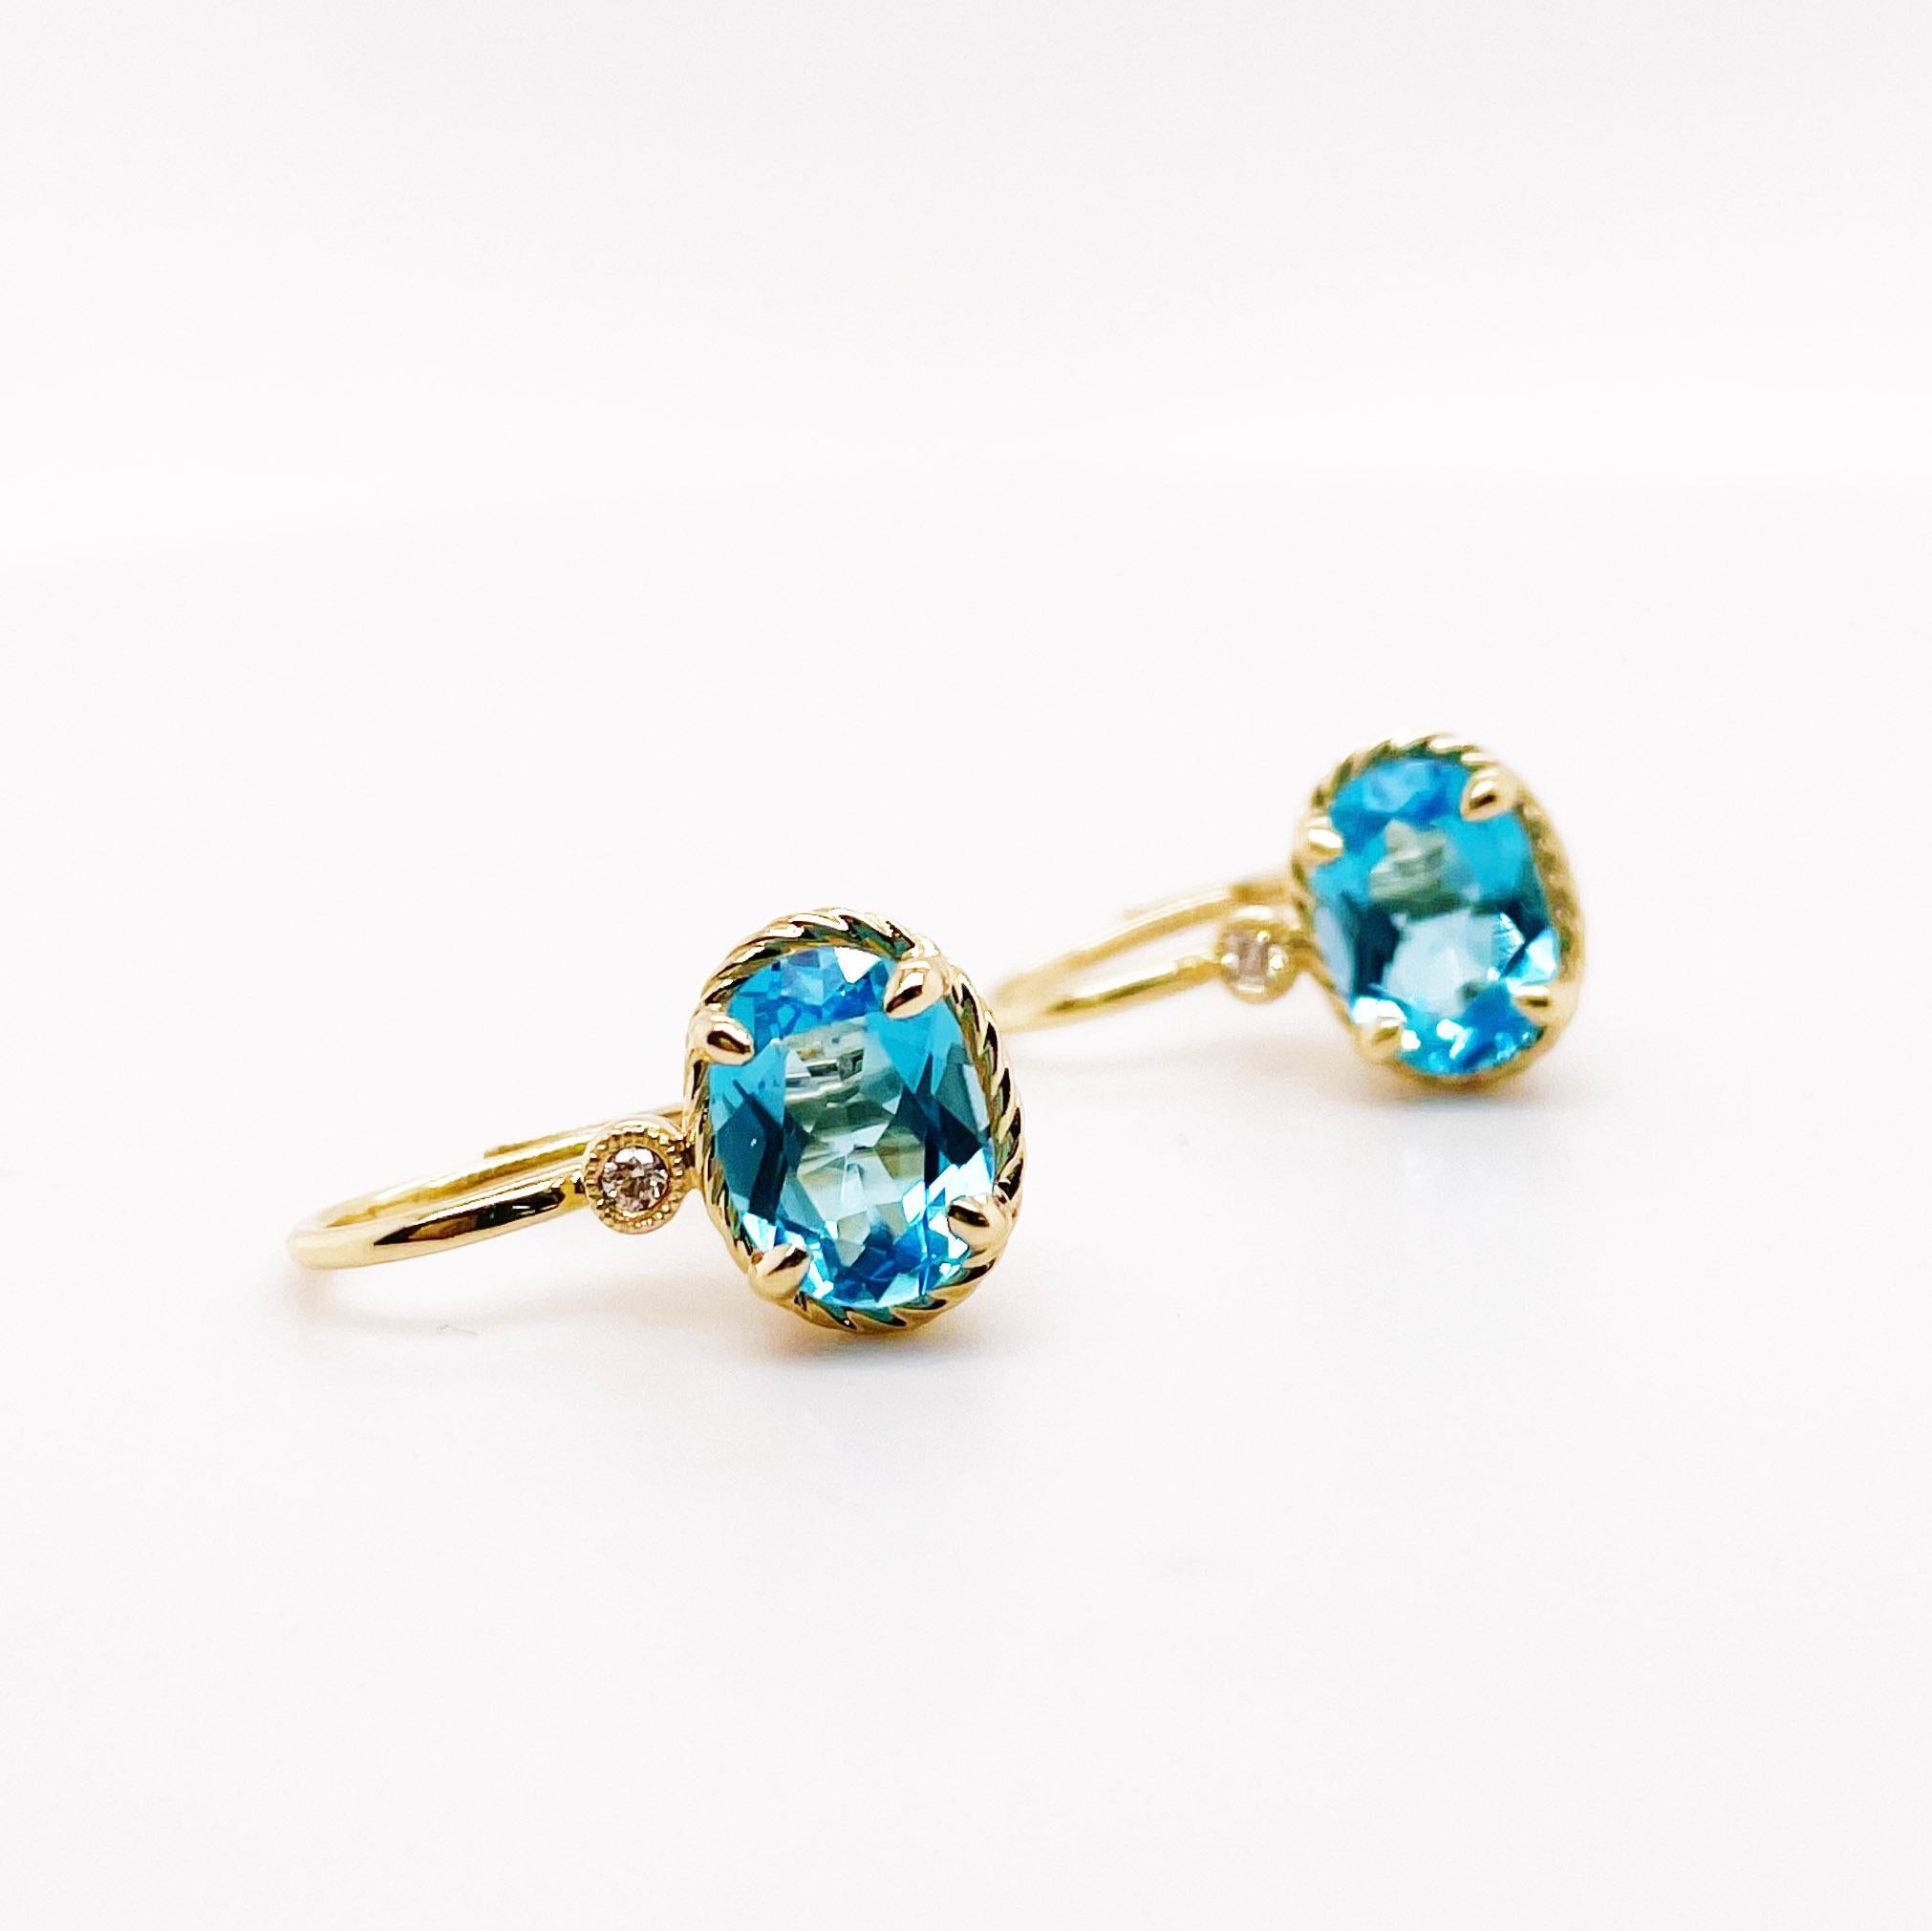 Do you want a touch of blue and diamonds in your earrings that can make your eyes pop without being too large? These earrings hang just right below your earlobe and really complete your accessories! The solid 14 karat yellow gold rope bezel and